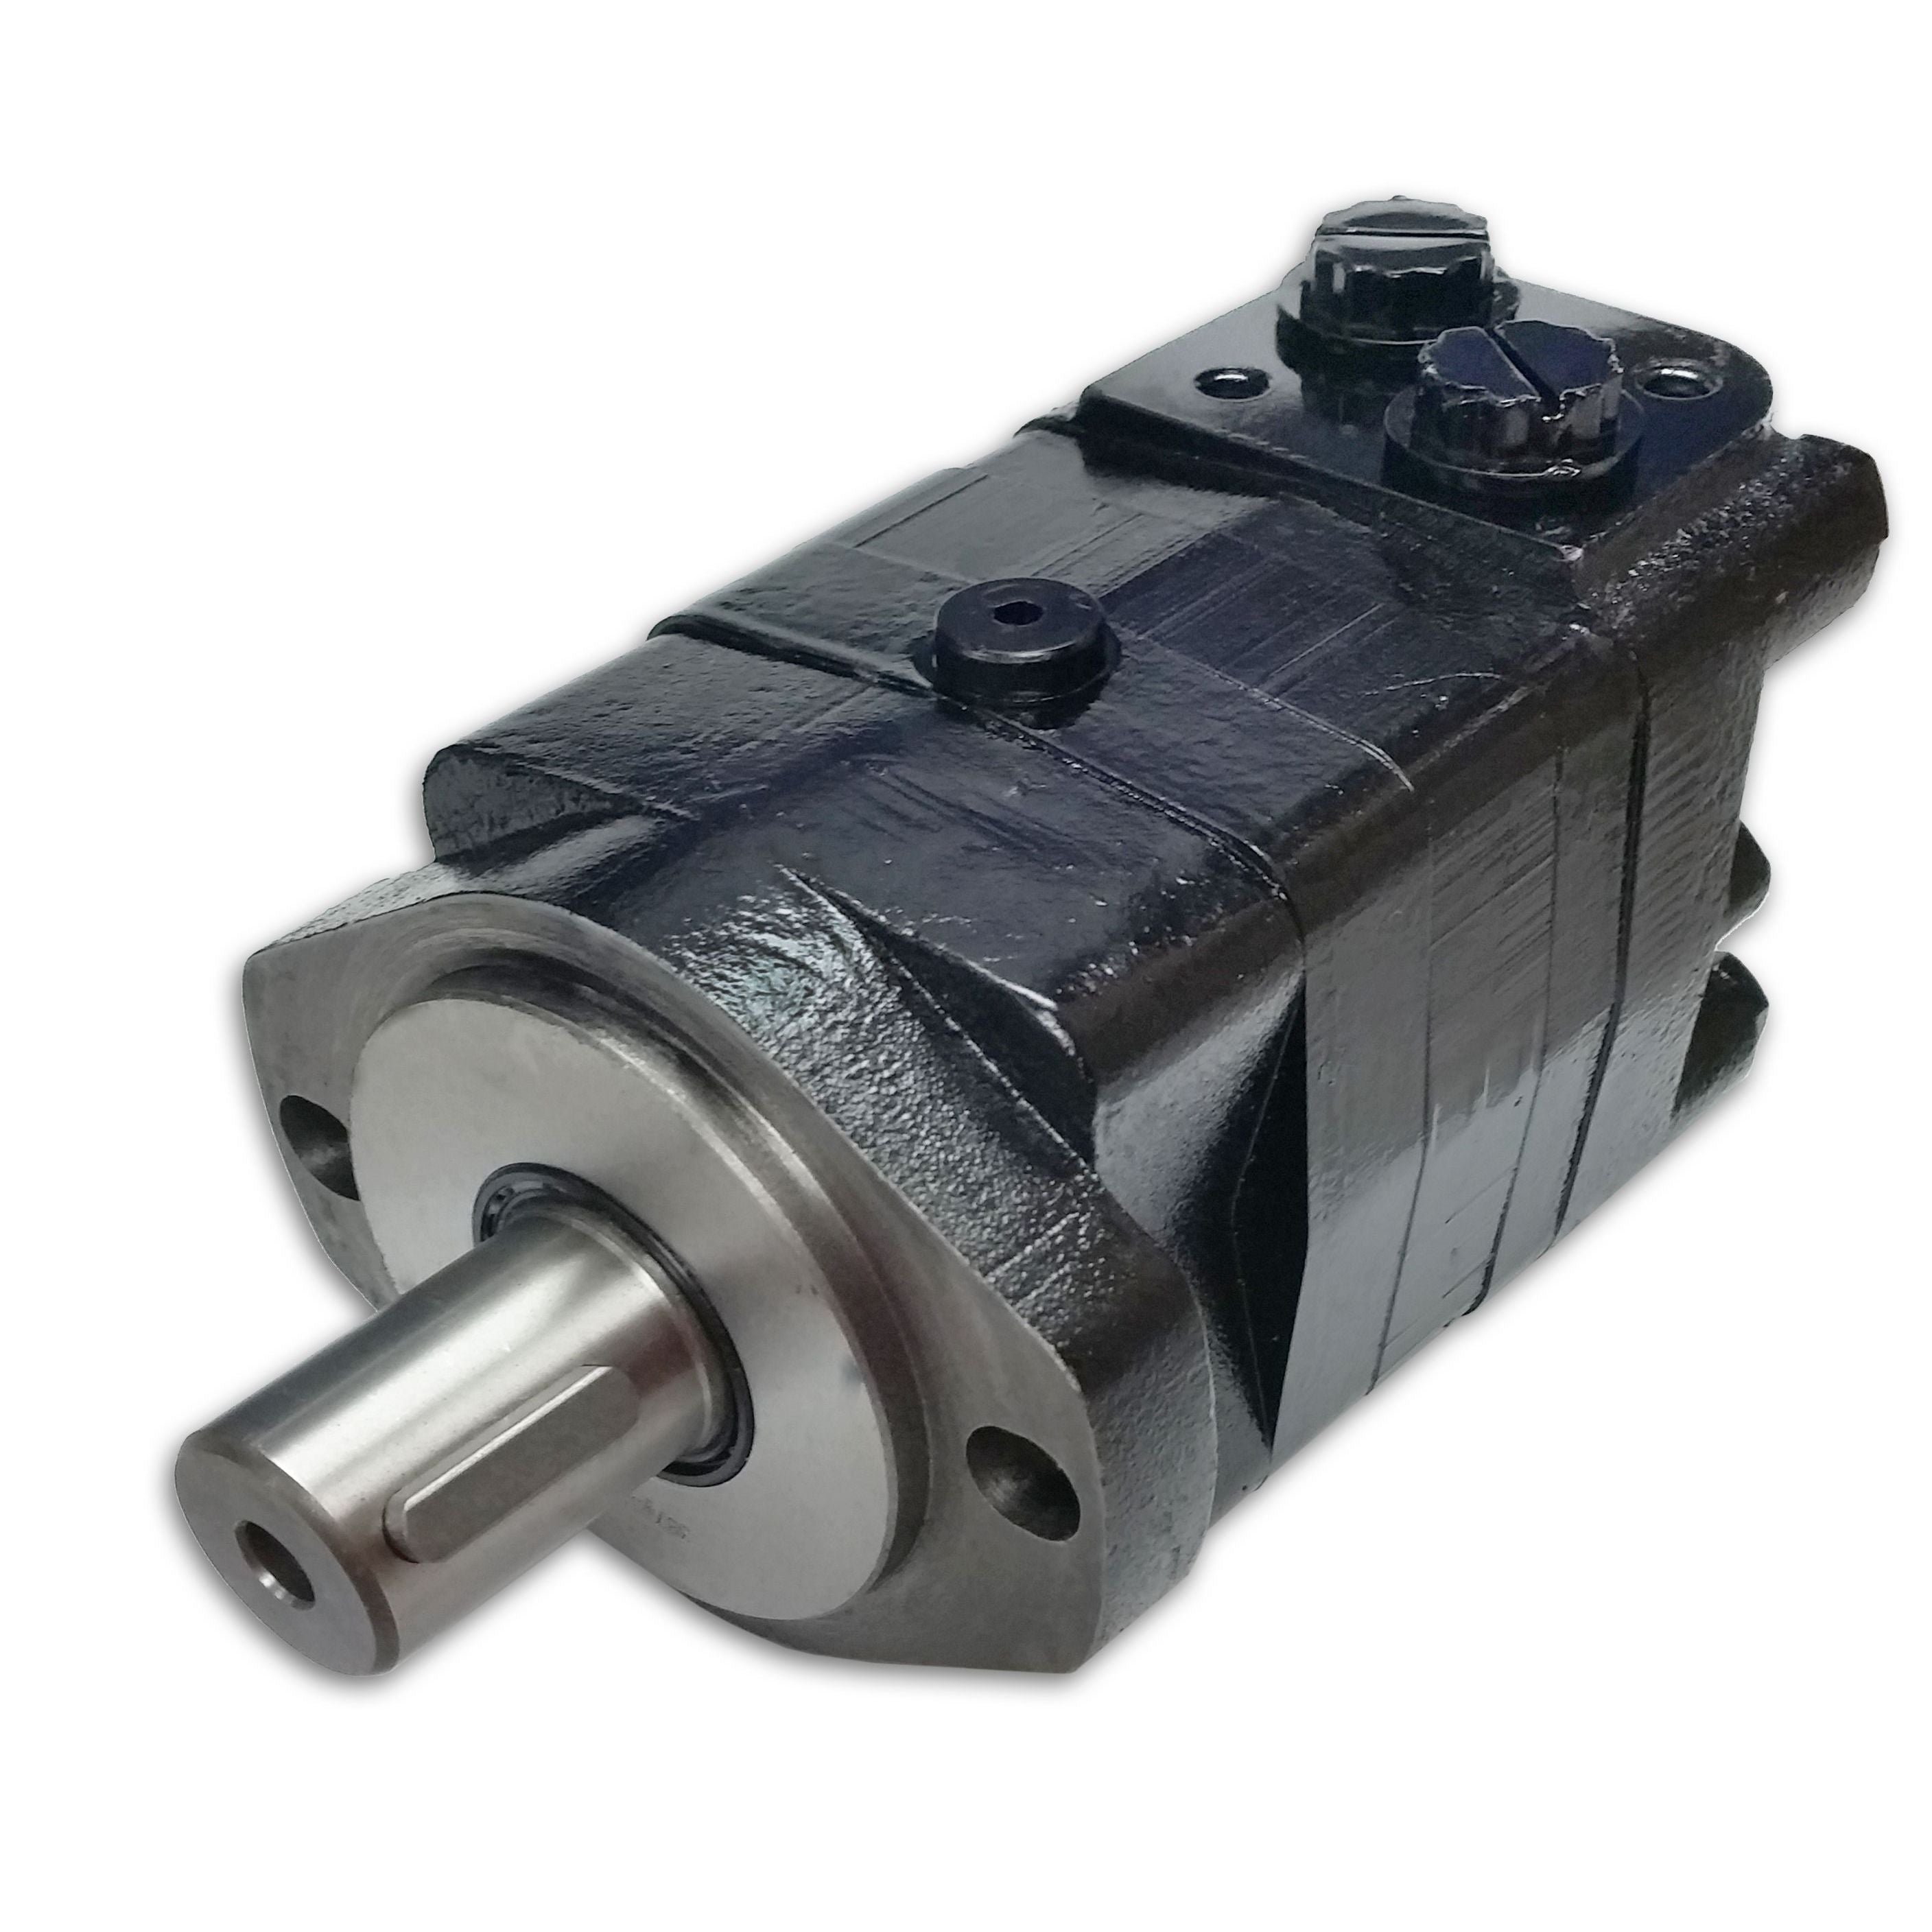 BMSY-100-E2-G-S : Dynamic LSHT Motor, 101cc, 748RPM, 2566in-lb, 2973psi Differential, 19.81GPM, SAE A 2-Bolt Mount, 1.25" Bore x 5/16" Key Shaft, Side Ported, #10 SAE (5/8")